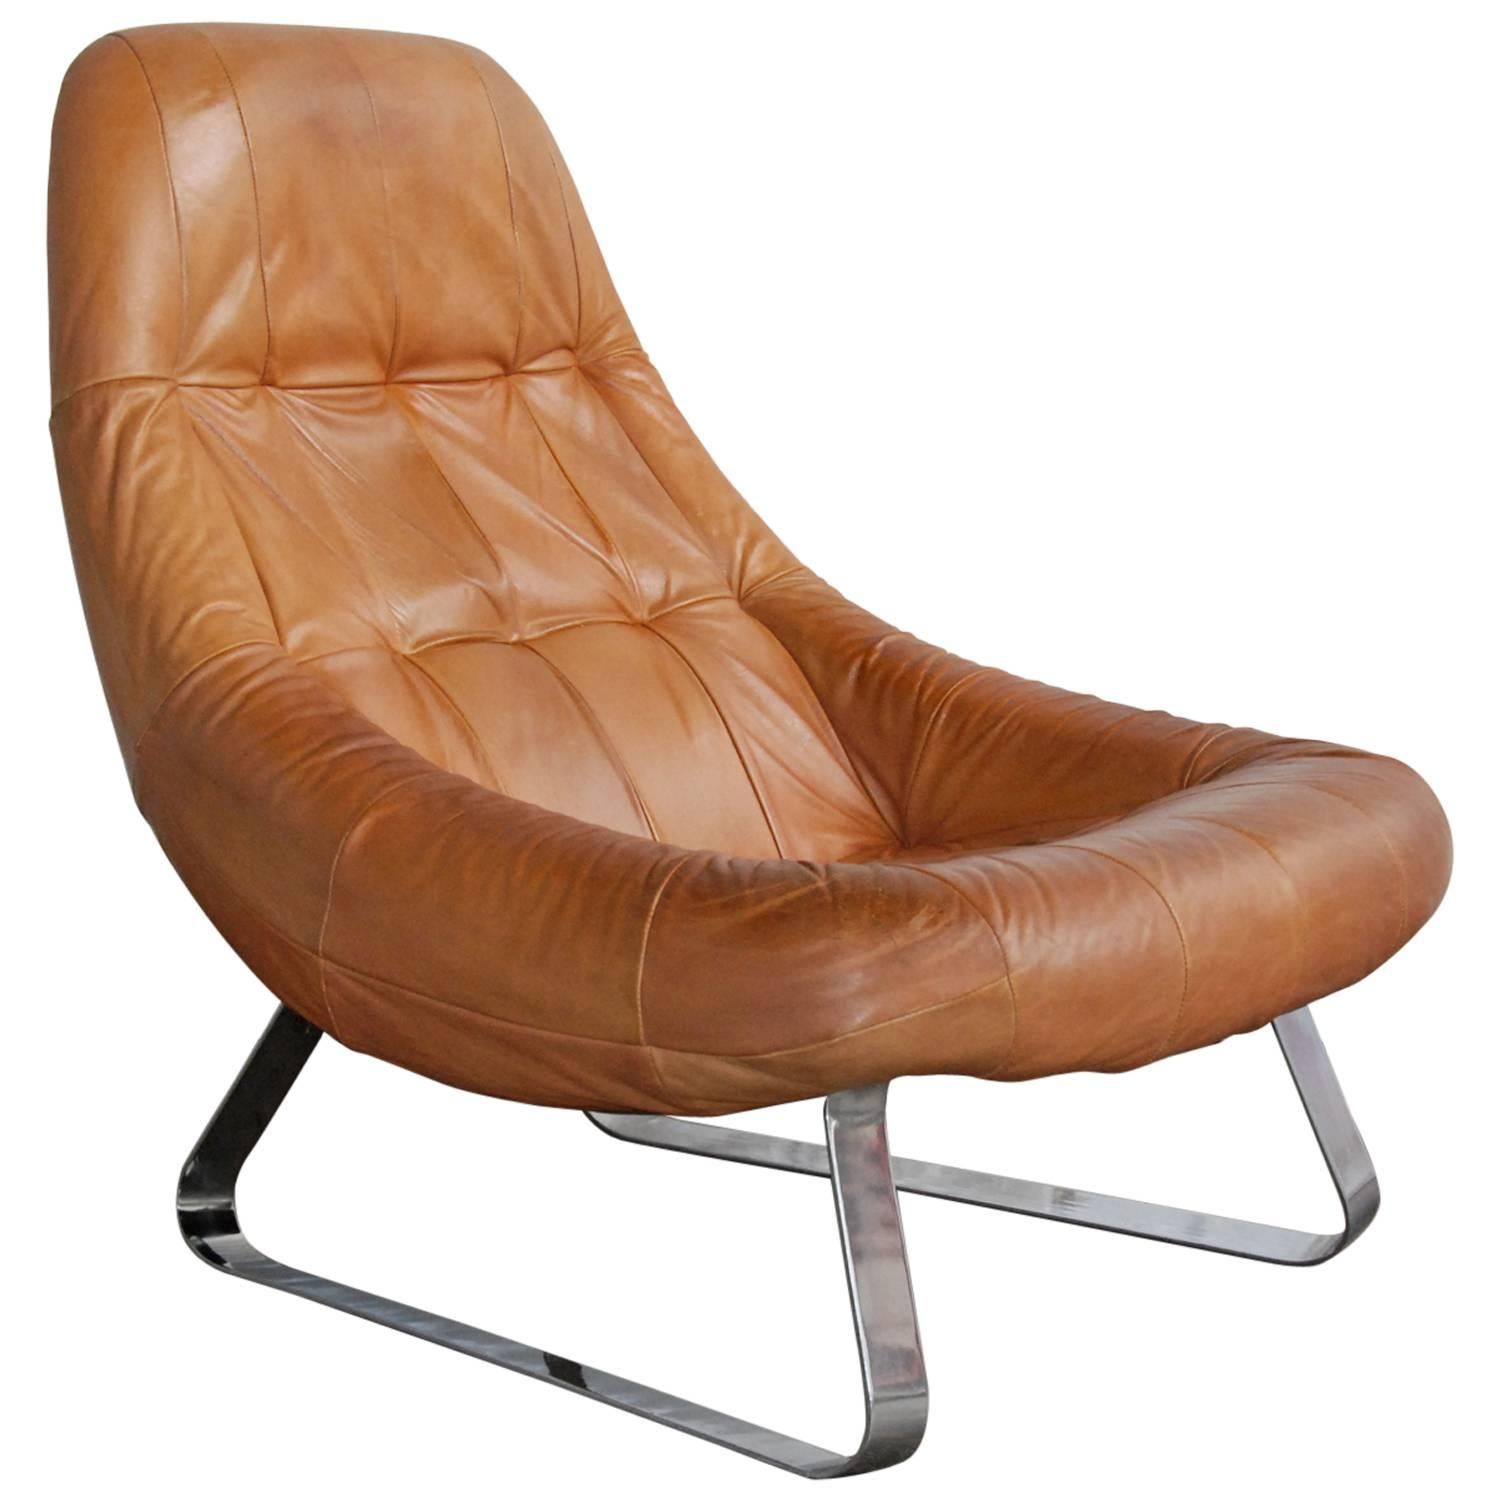 Percival Lafer MP-163 "Earth Chair" in Leather and Chromed Steel Brazil 1976